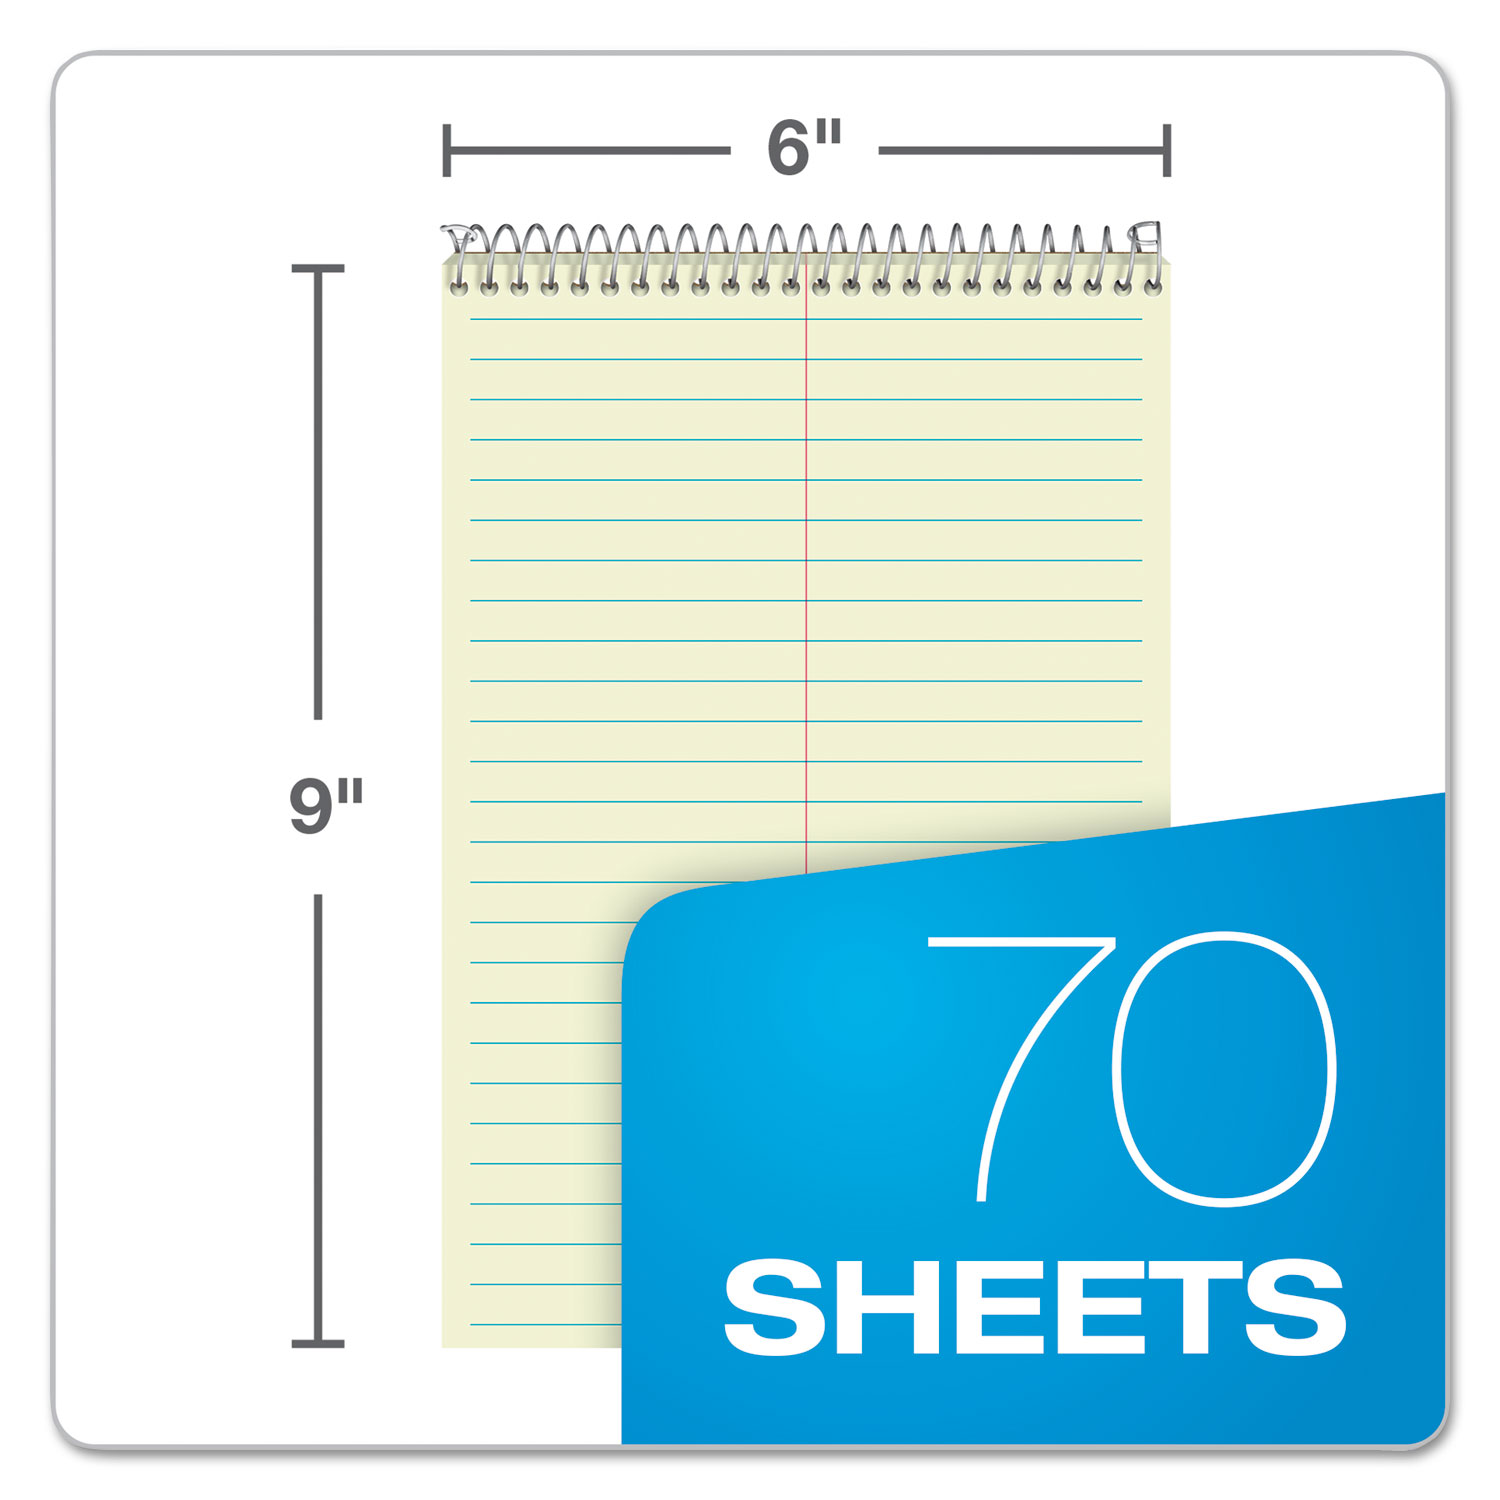 Steno Books, Gregg Rule, Tan Cover, 6 x 9, 70 Green Tint Sheets, 6/Pack